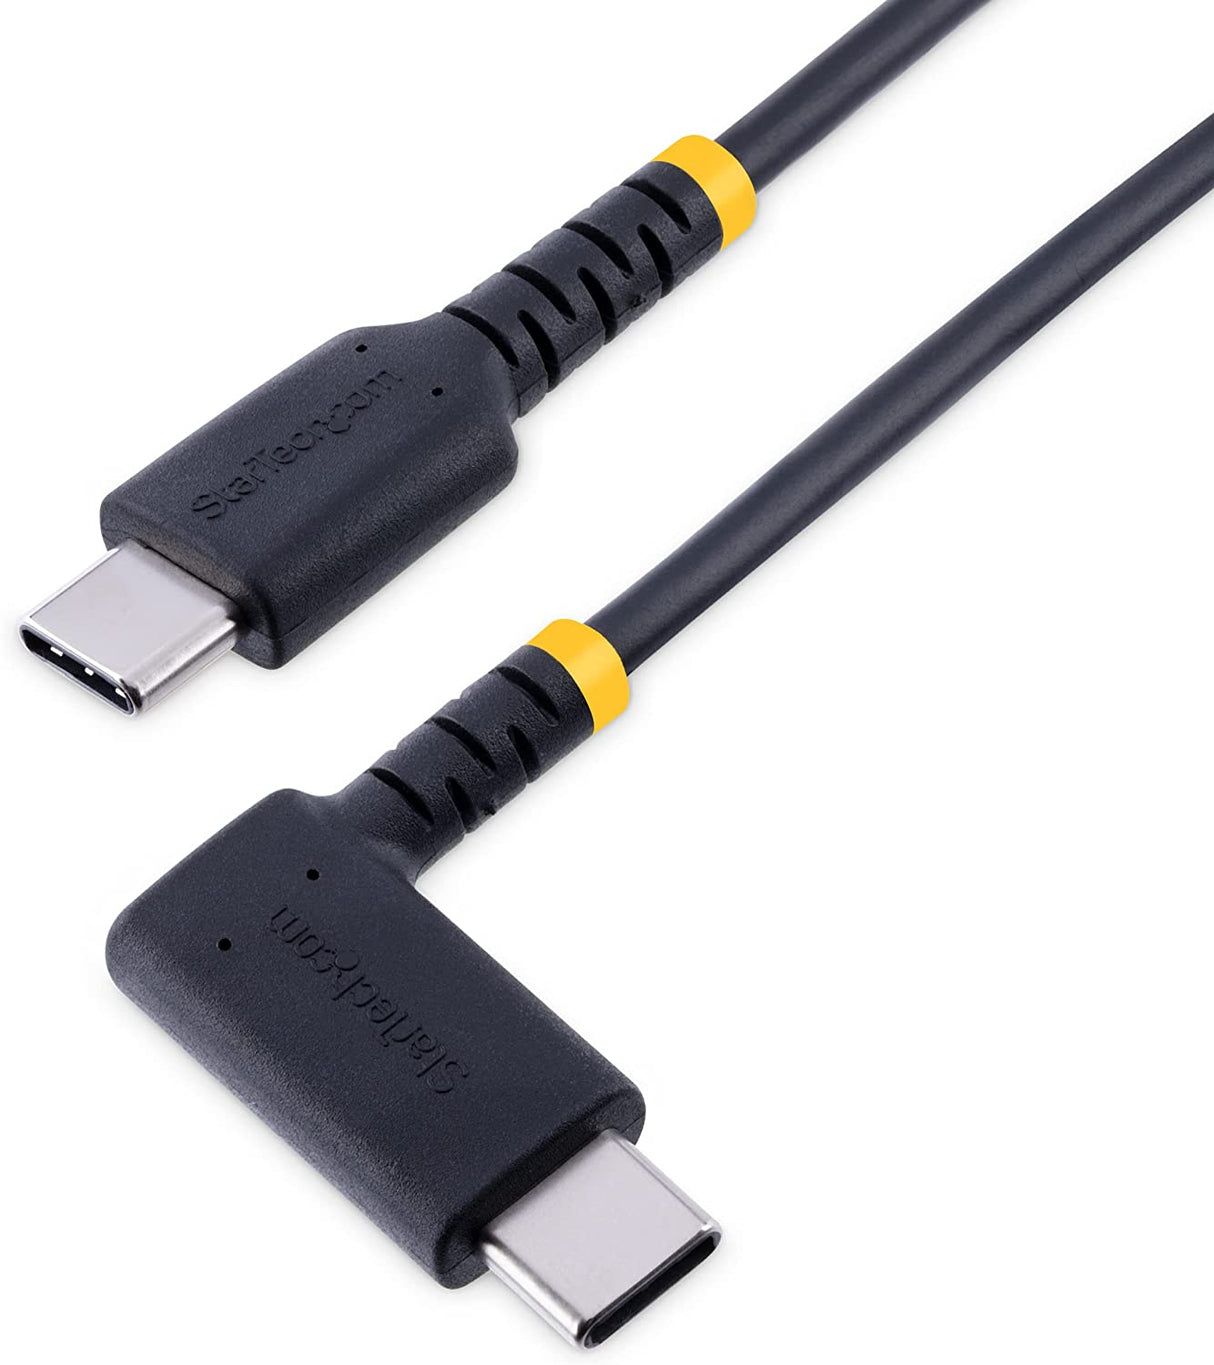 StarTech.com 6in (15cm) USB C Charging Cable Right Angle - 60W PD 3A - Heavy Duty Fast Charge USB-C Cable - USB 2.0 Type-C - Rugged Aramid Fiber - Short USB Cord (R2CCR-15C-USB-CABLE)